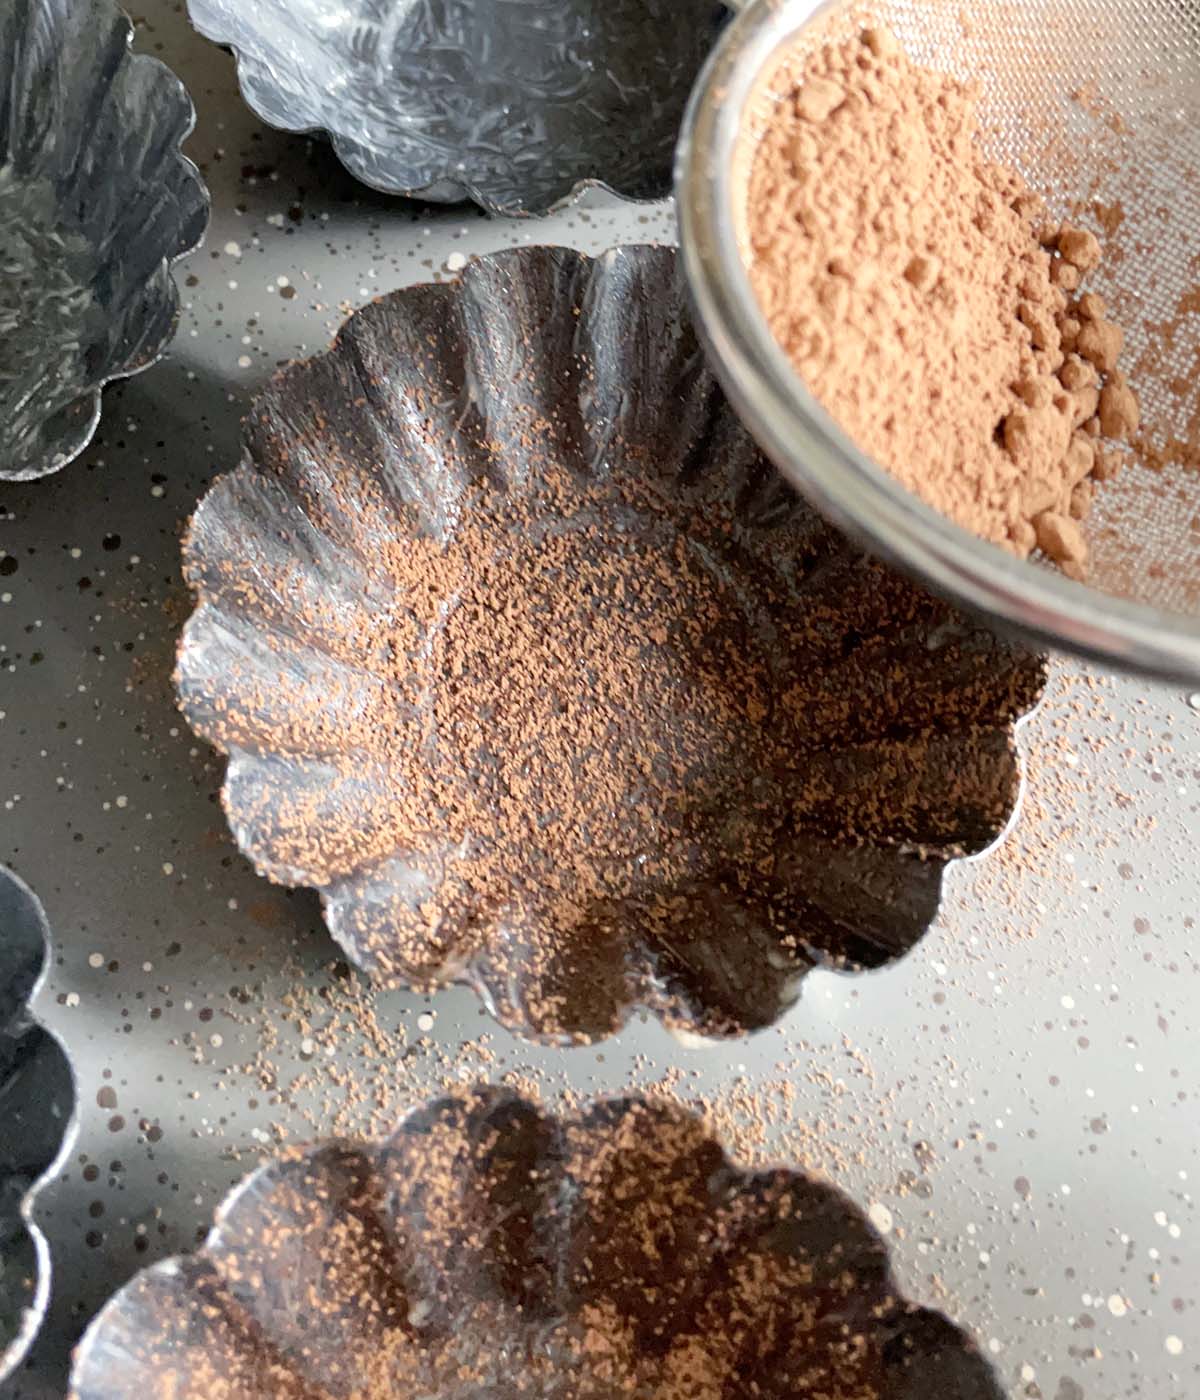 Brown cocoa being sprinkled on grey fluted baking dishes.